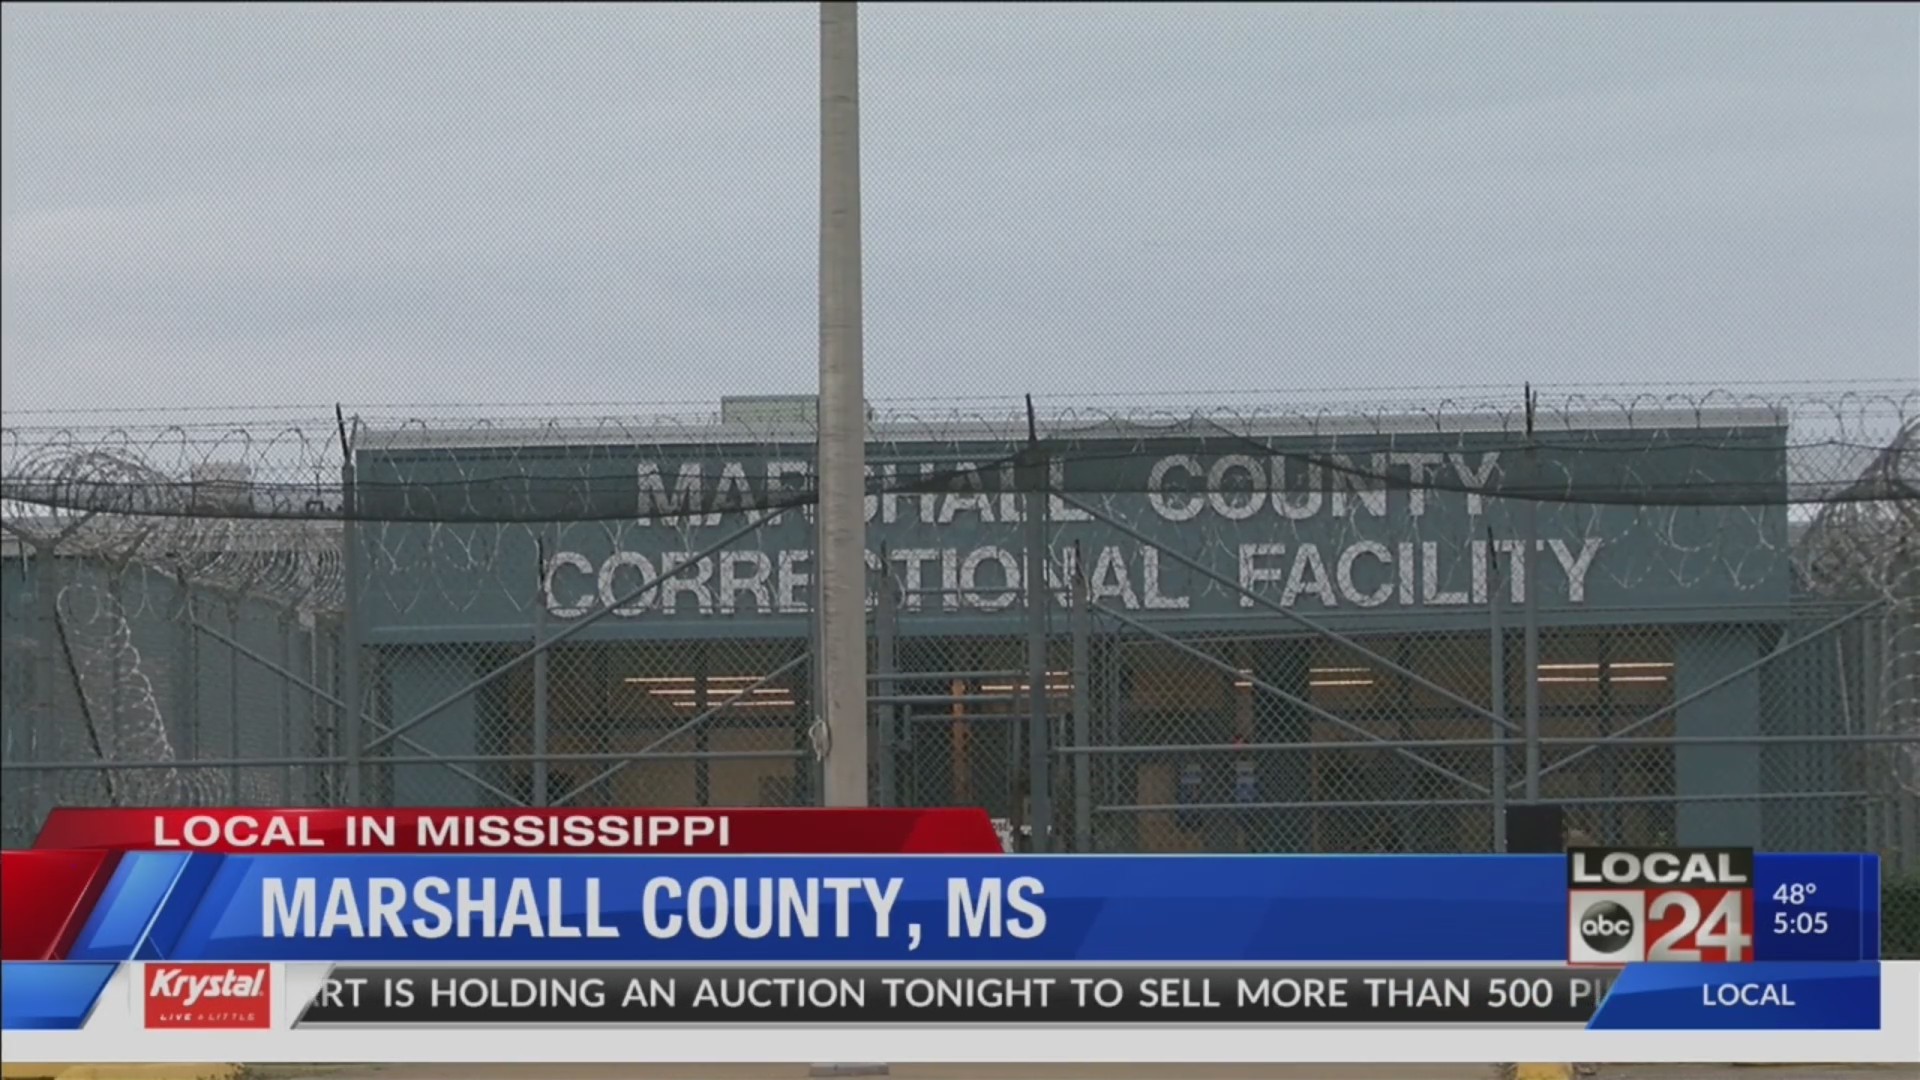 TWO INMATES DEATHS IN NORTHERN MS